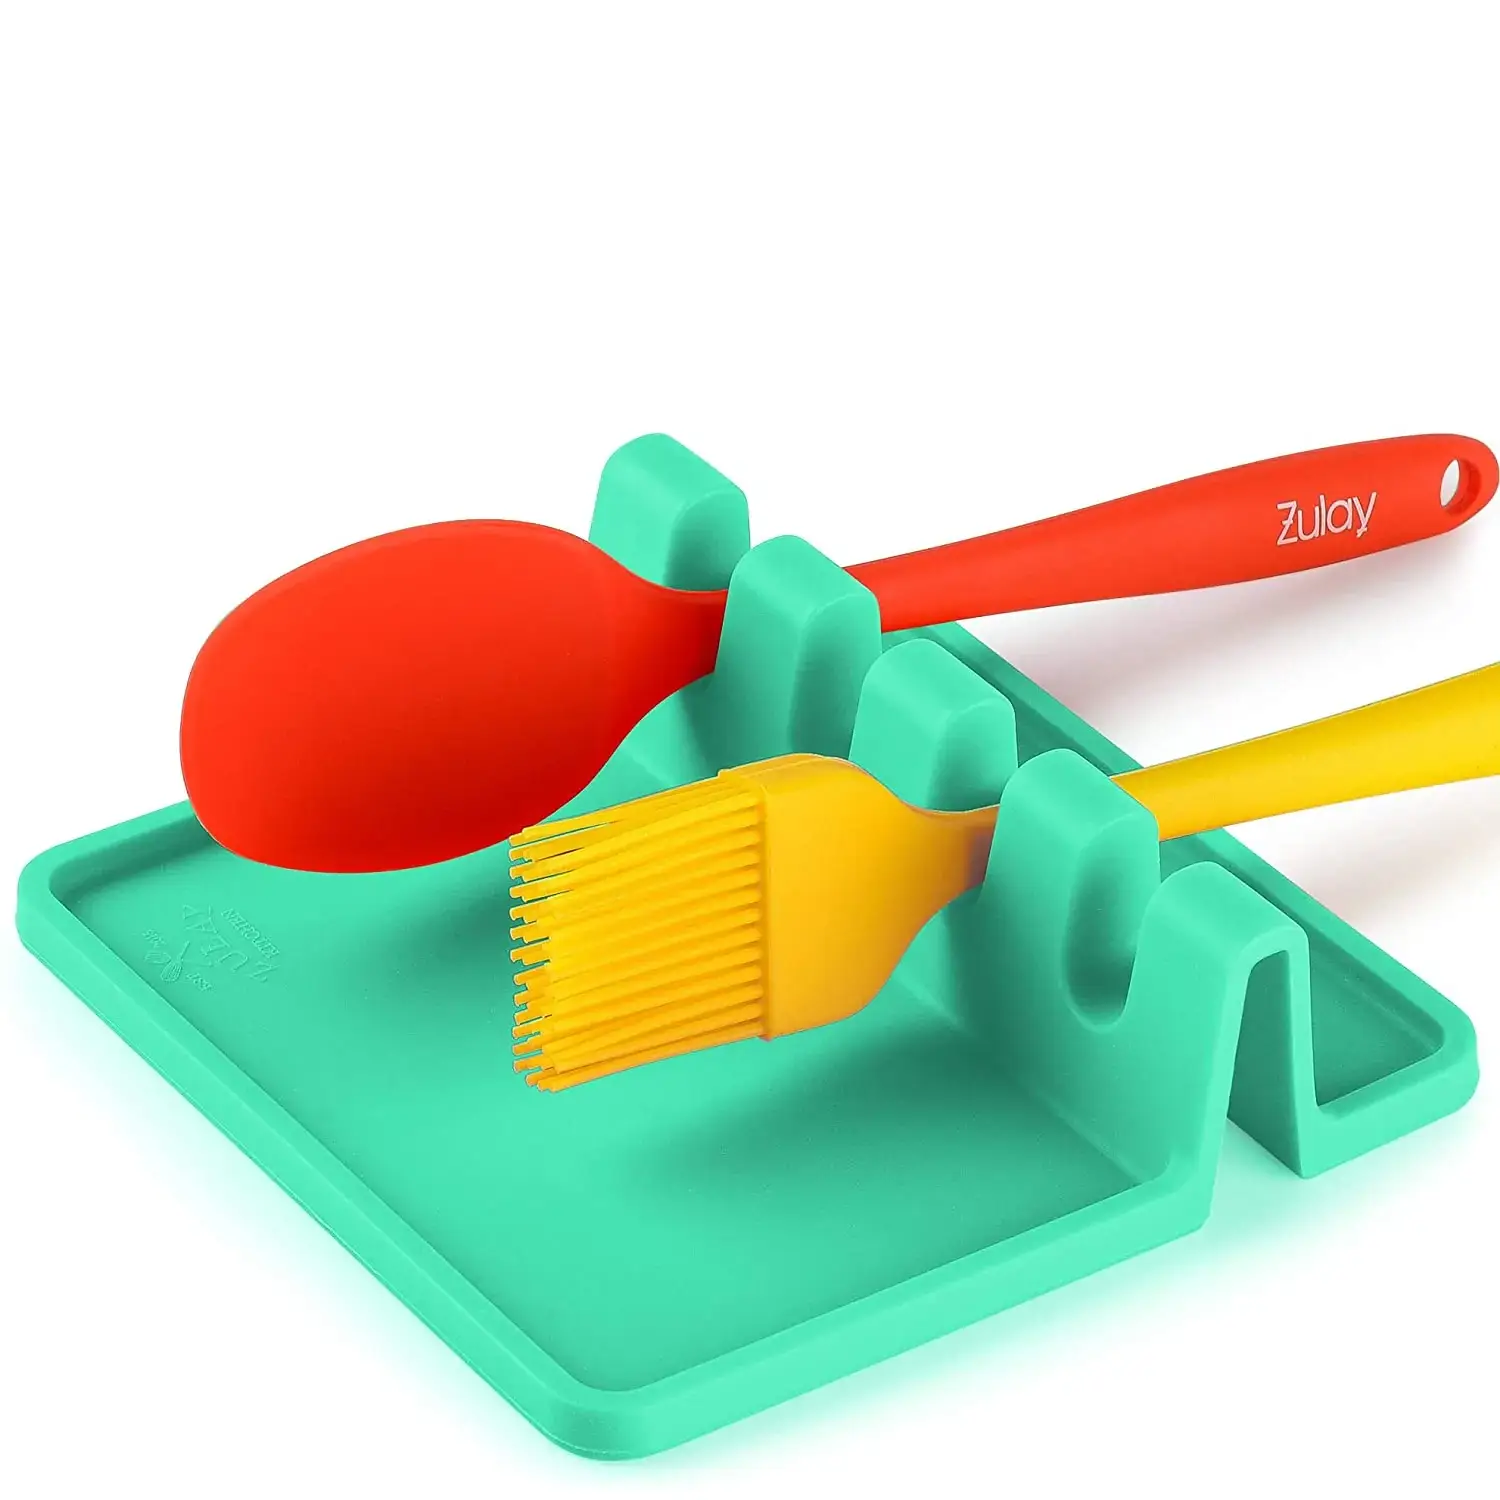 Silicone Utensil Rest with Drip Pad - Dark Grey